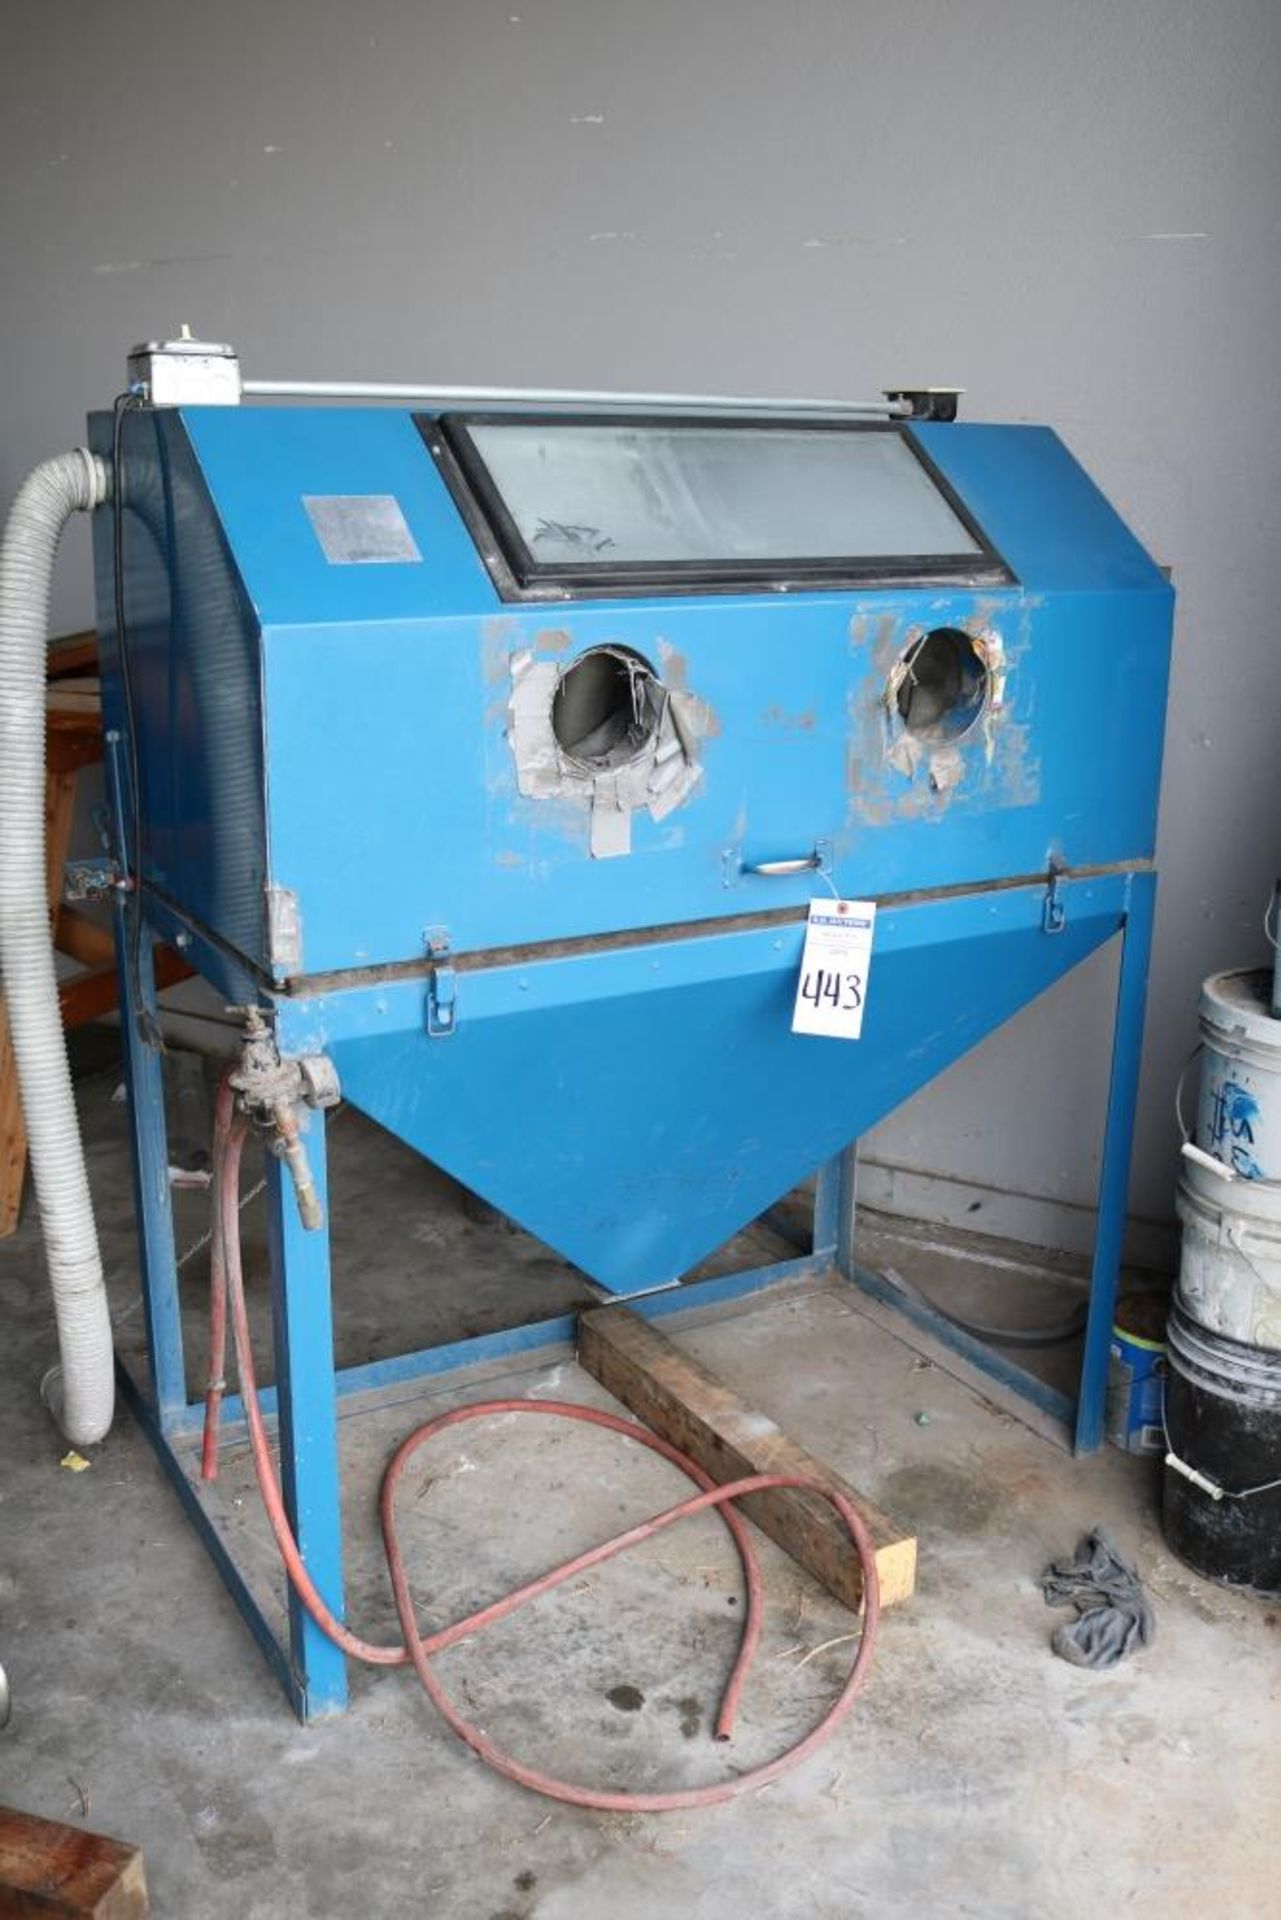 Cyclone MFG Blast Cabinet, Model 4826 with Cyclone Air Filter 48" x 25" x 26" - Image 7 of 7